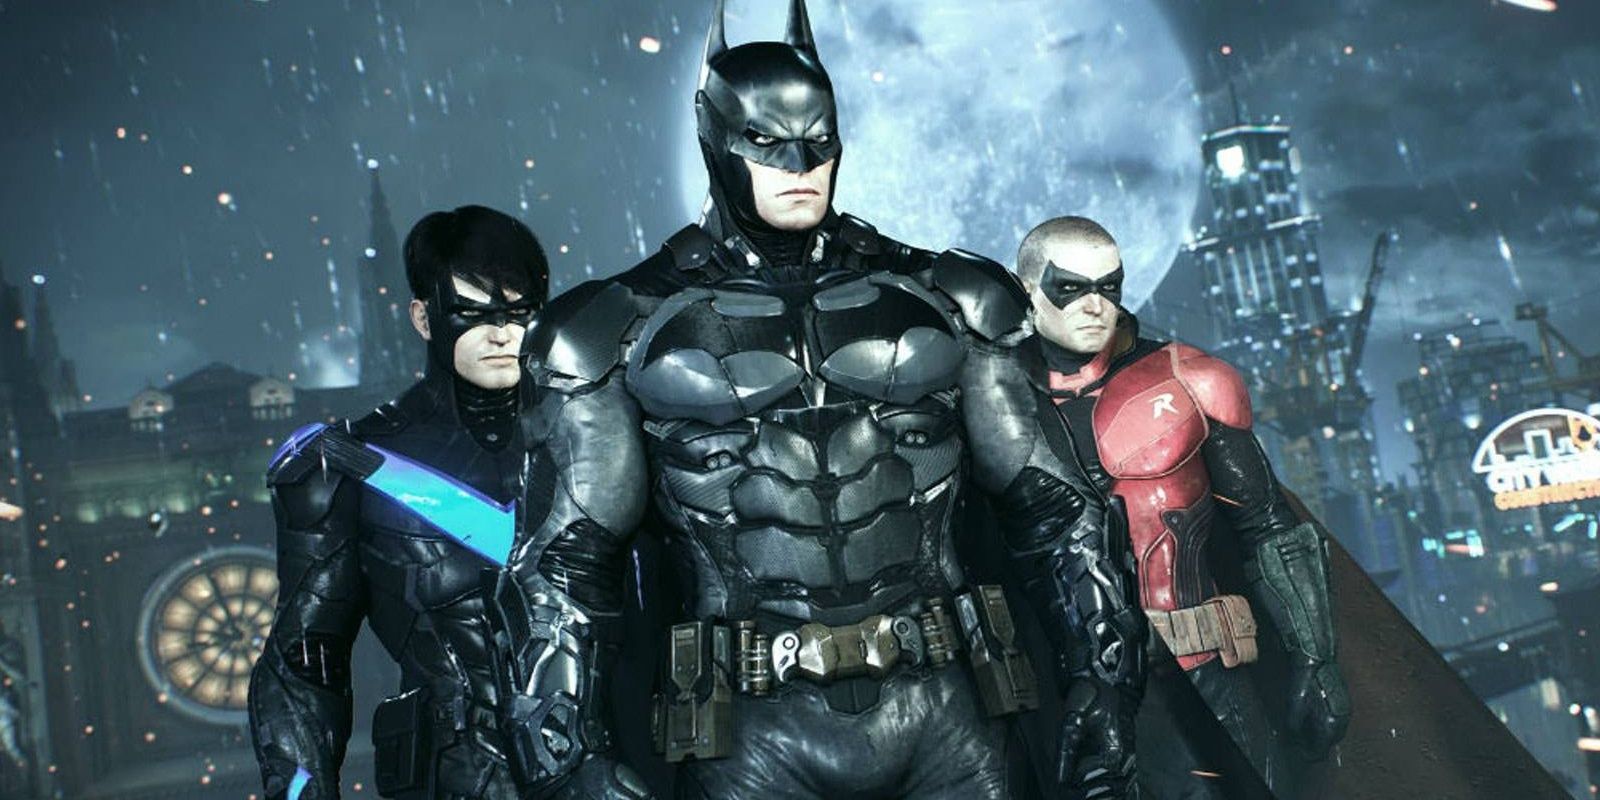 Arkham Knight's supporting cast of characters alongside Batman